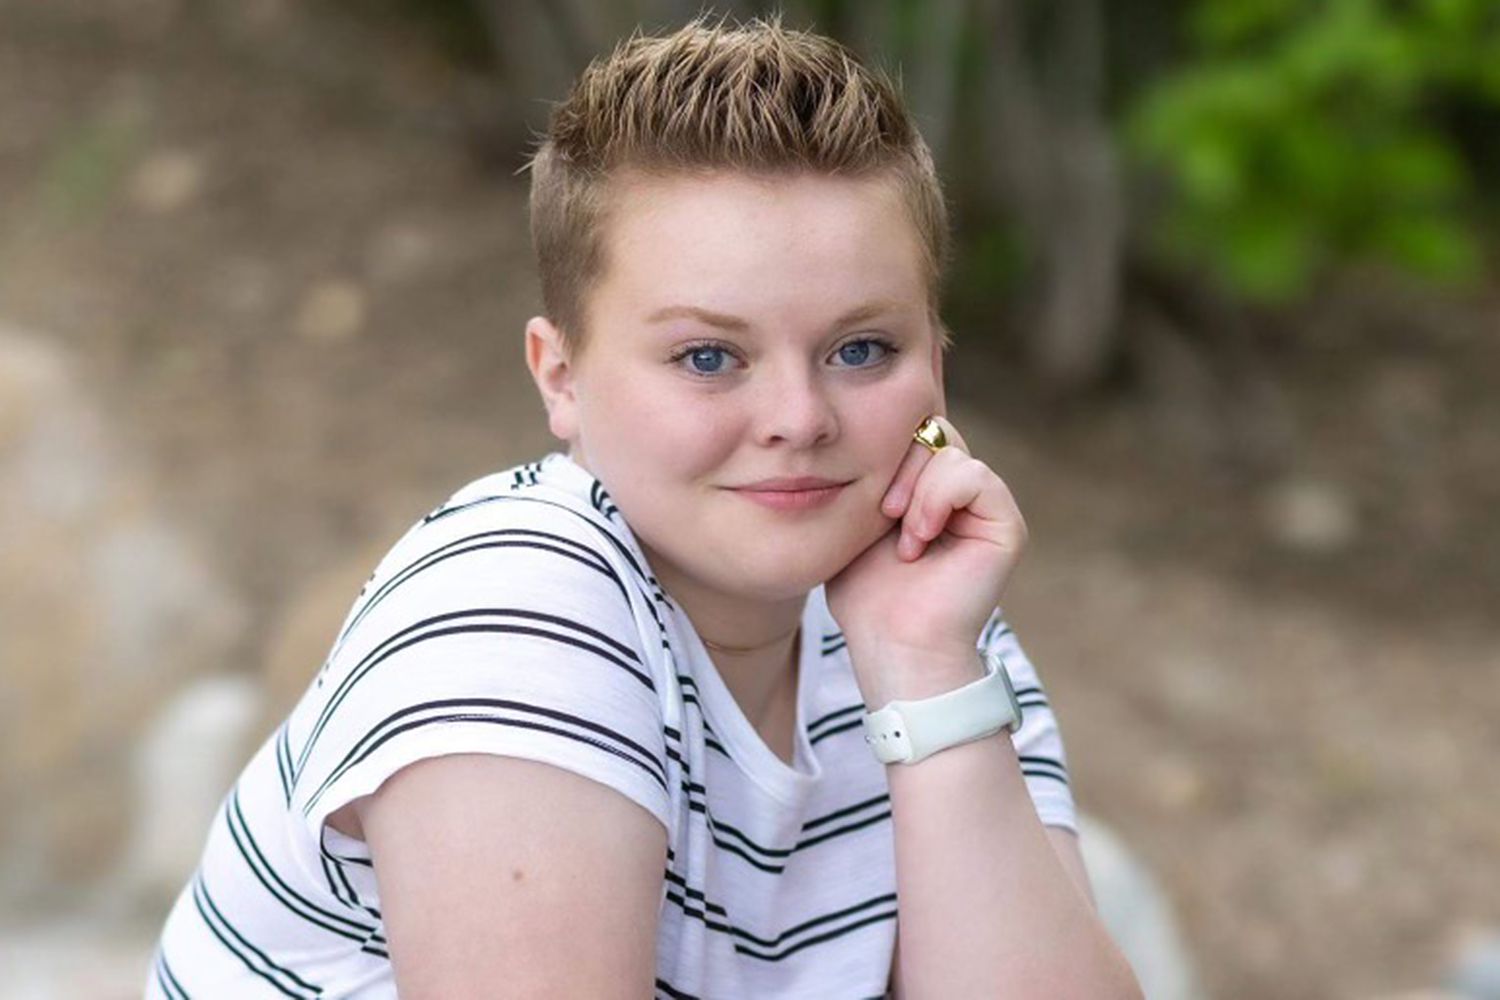 Teen Who Died of Cancer Will Be Honored at Graduation After Backlash [Video]